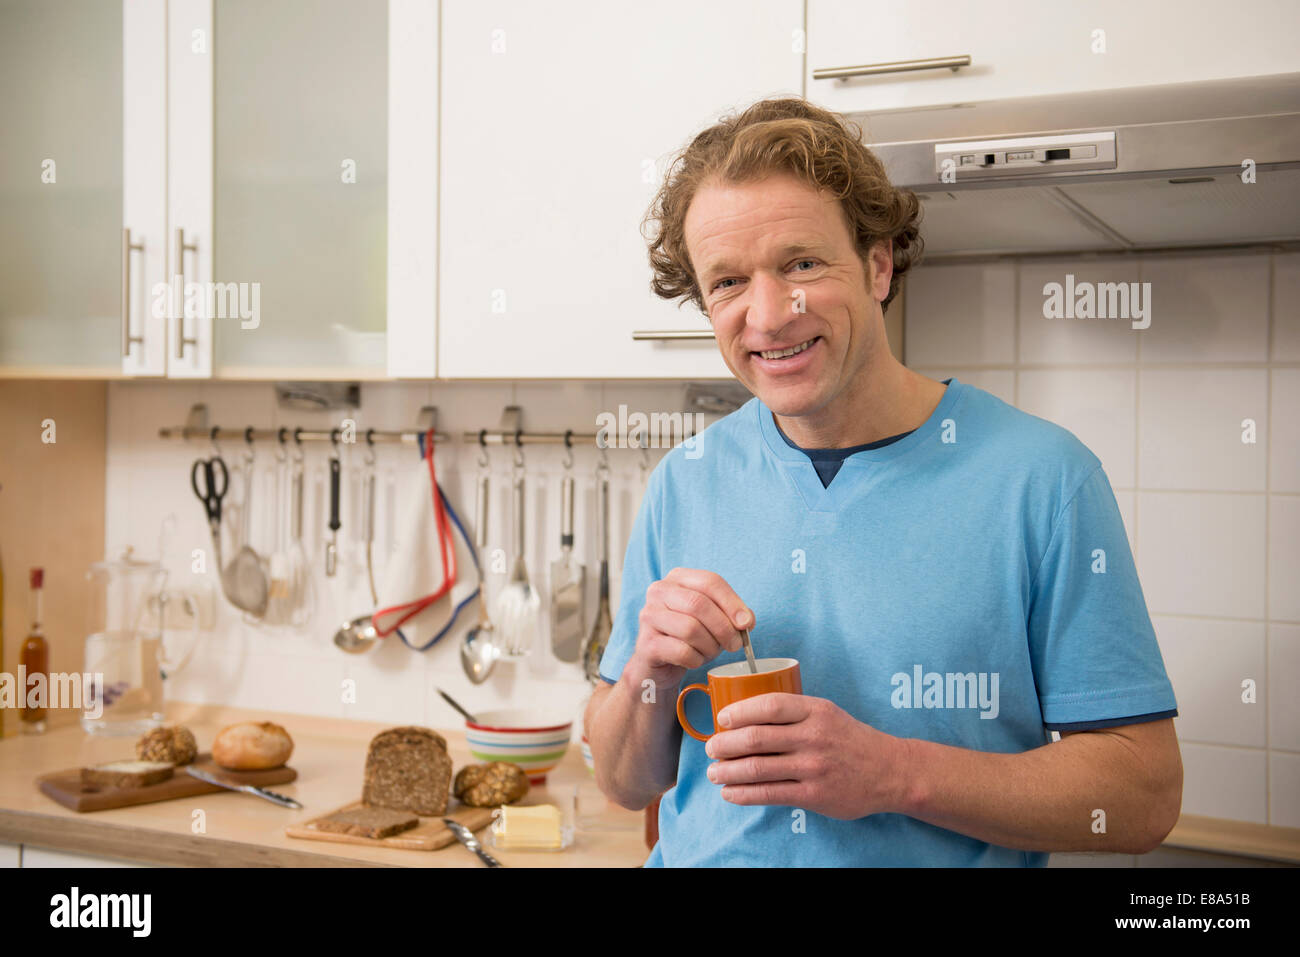 Smiling man with cup of coffee in kitchen Stock Photo